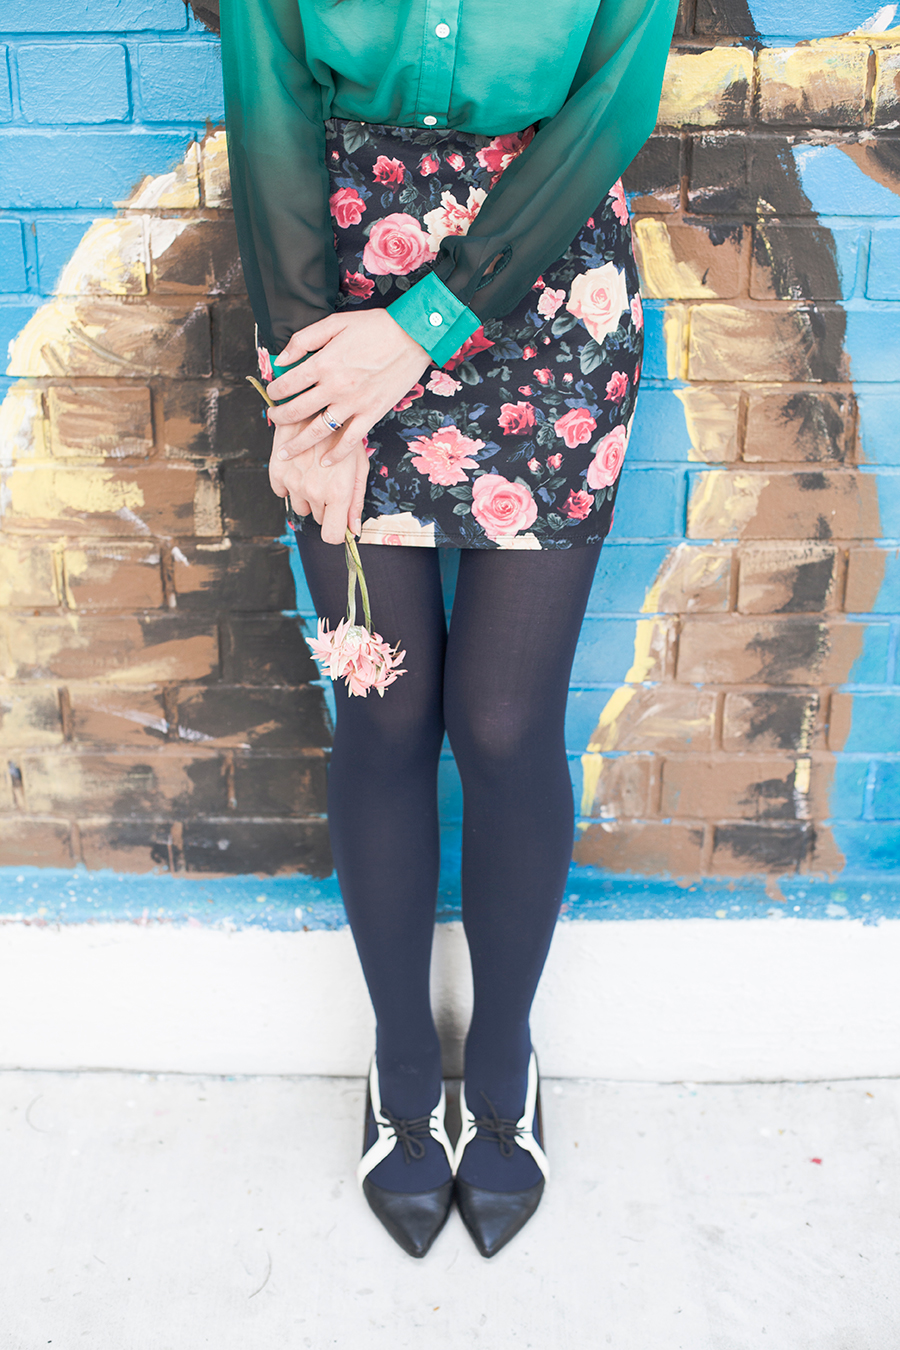 Holding onto pink flowers in a floral ootd.